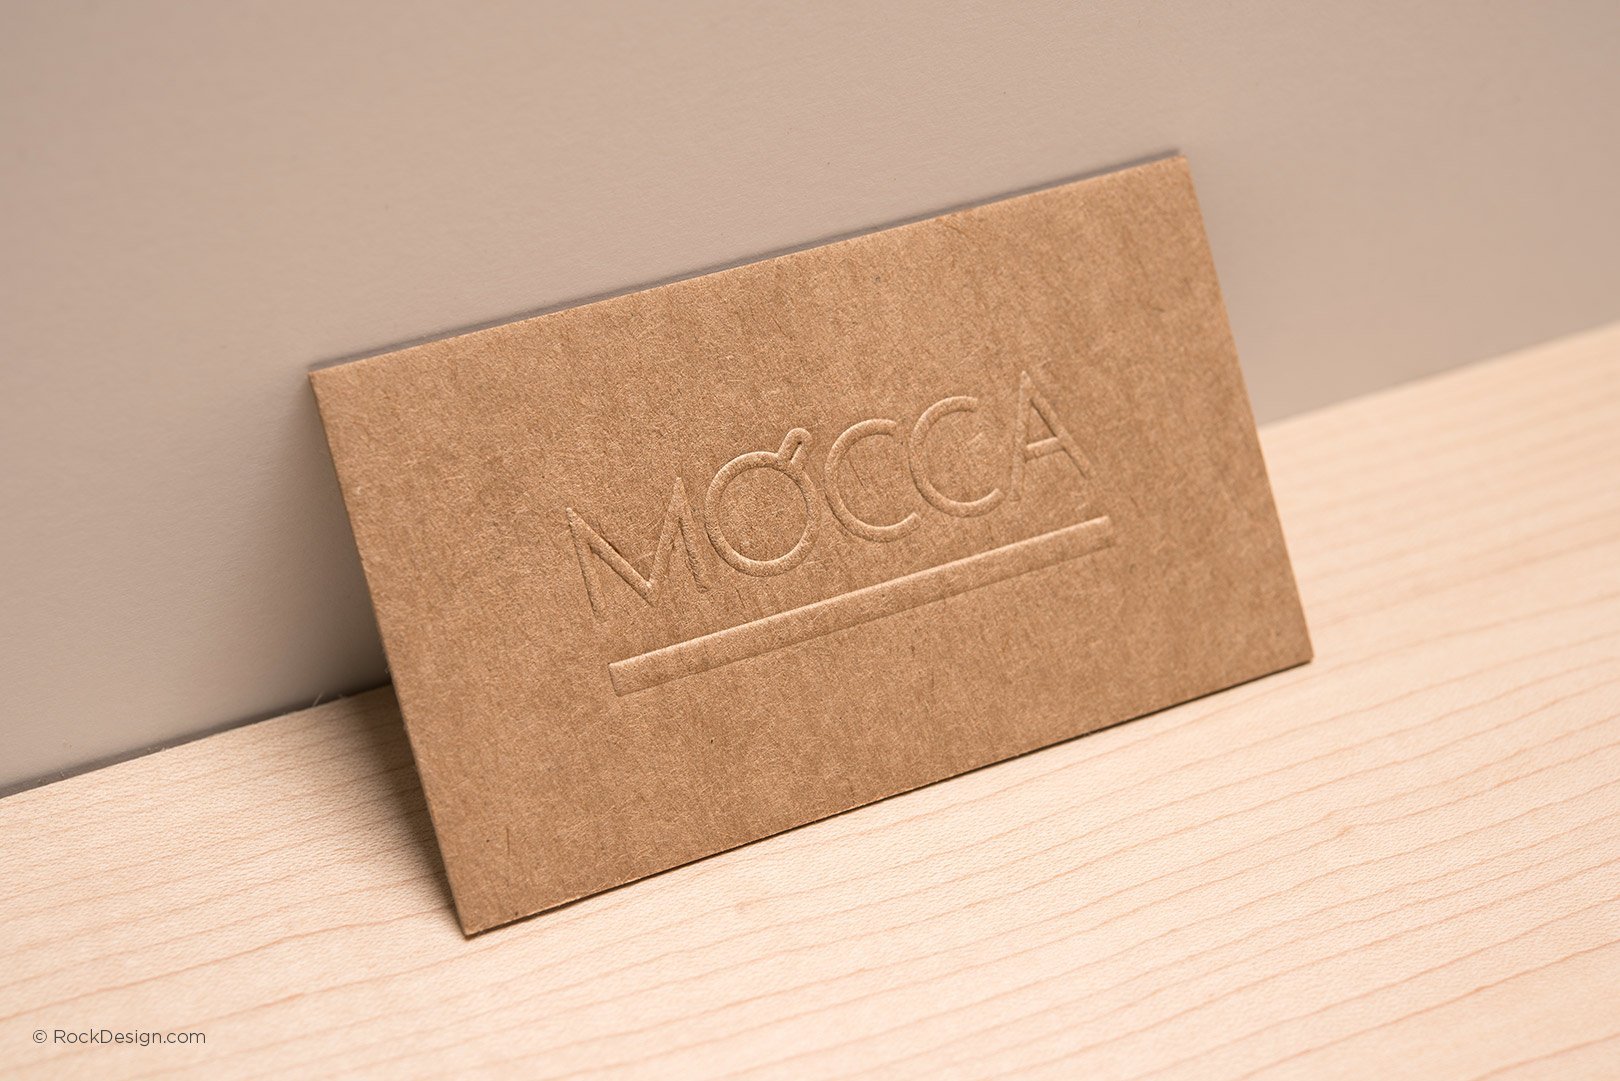 BUY kraft paper business cards NOW